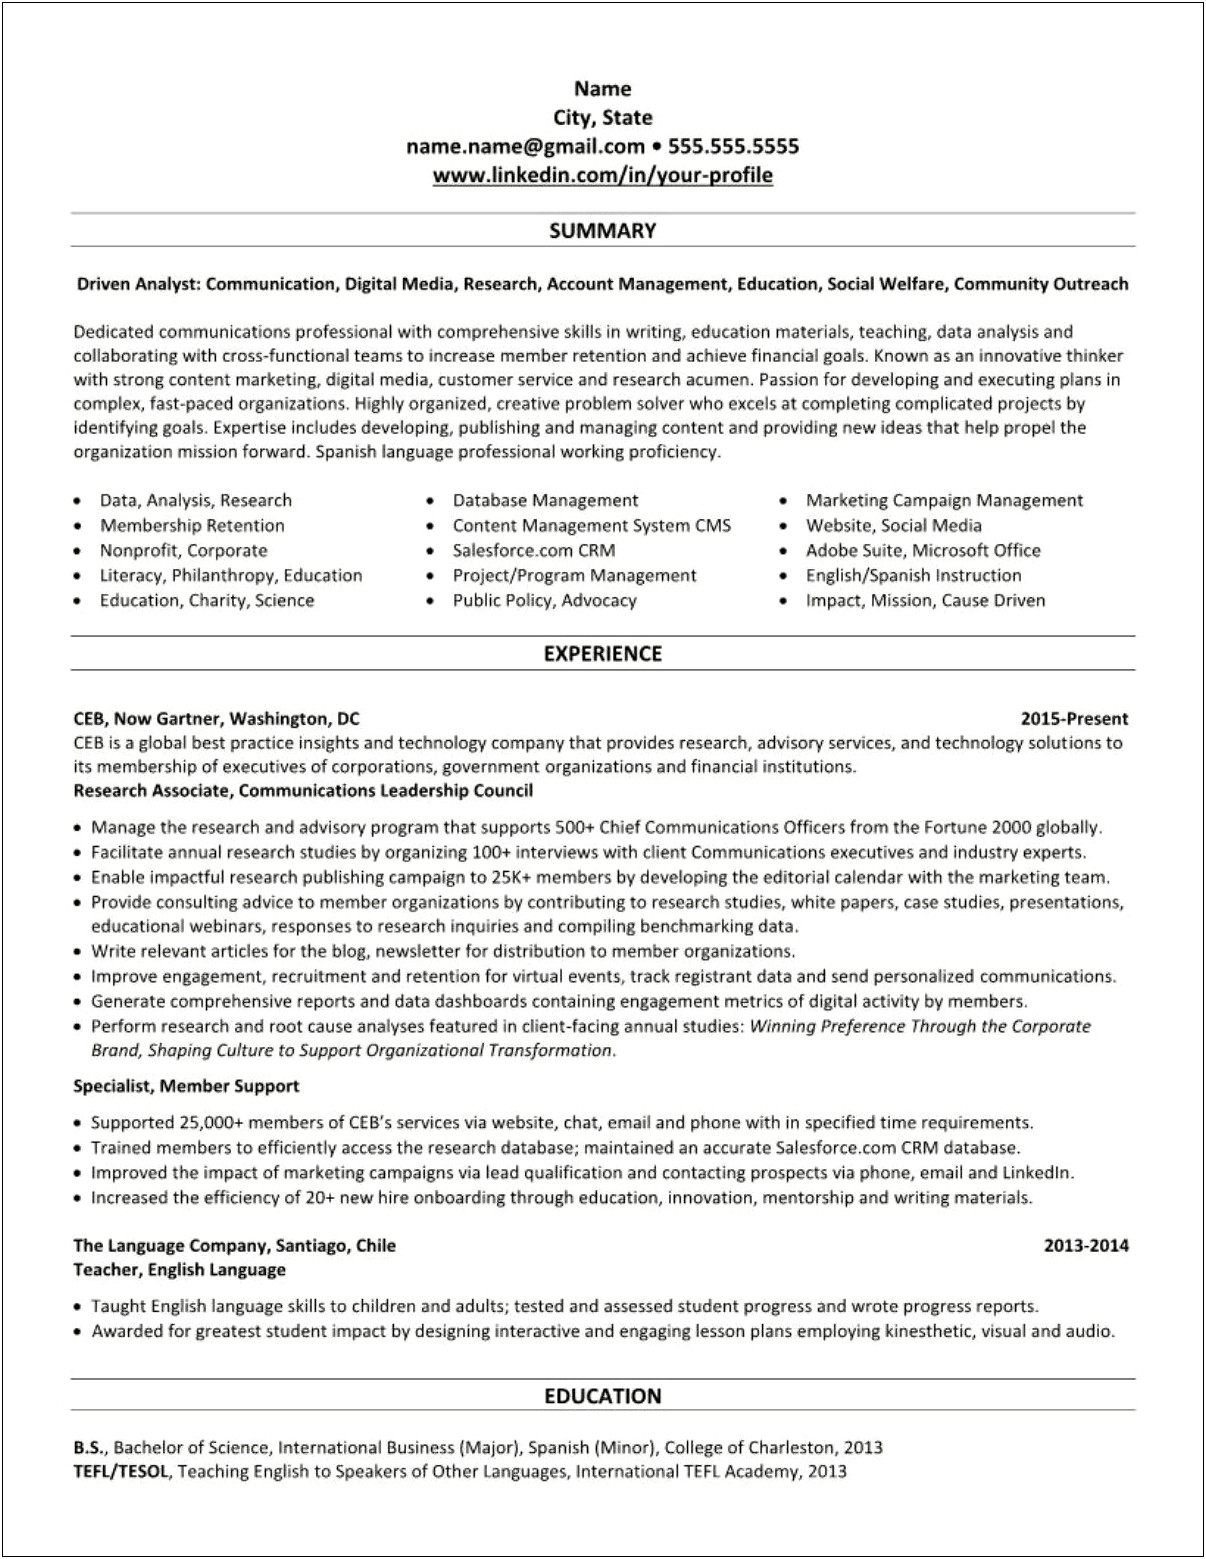 Profeesional Summary For Resume Examples